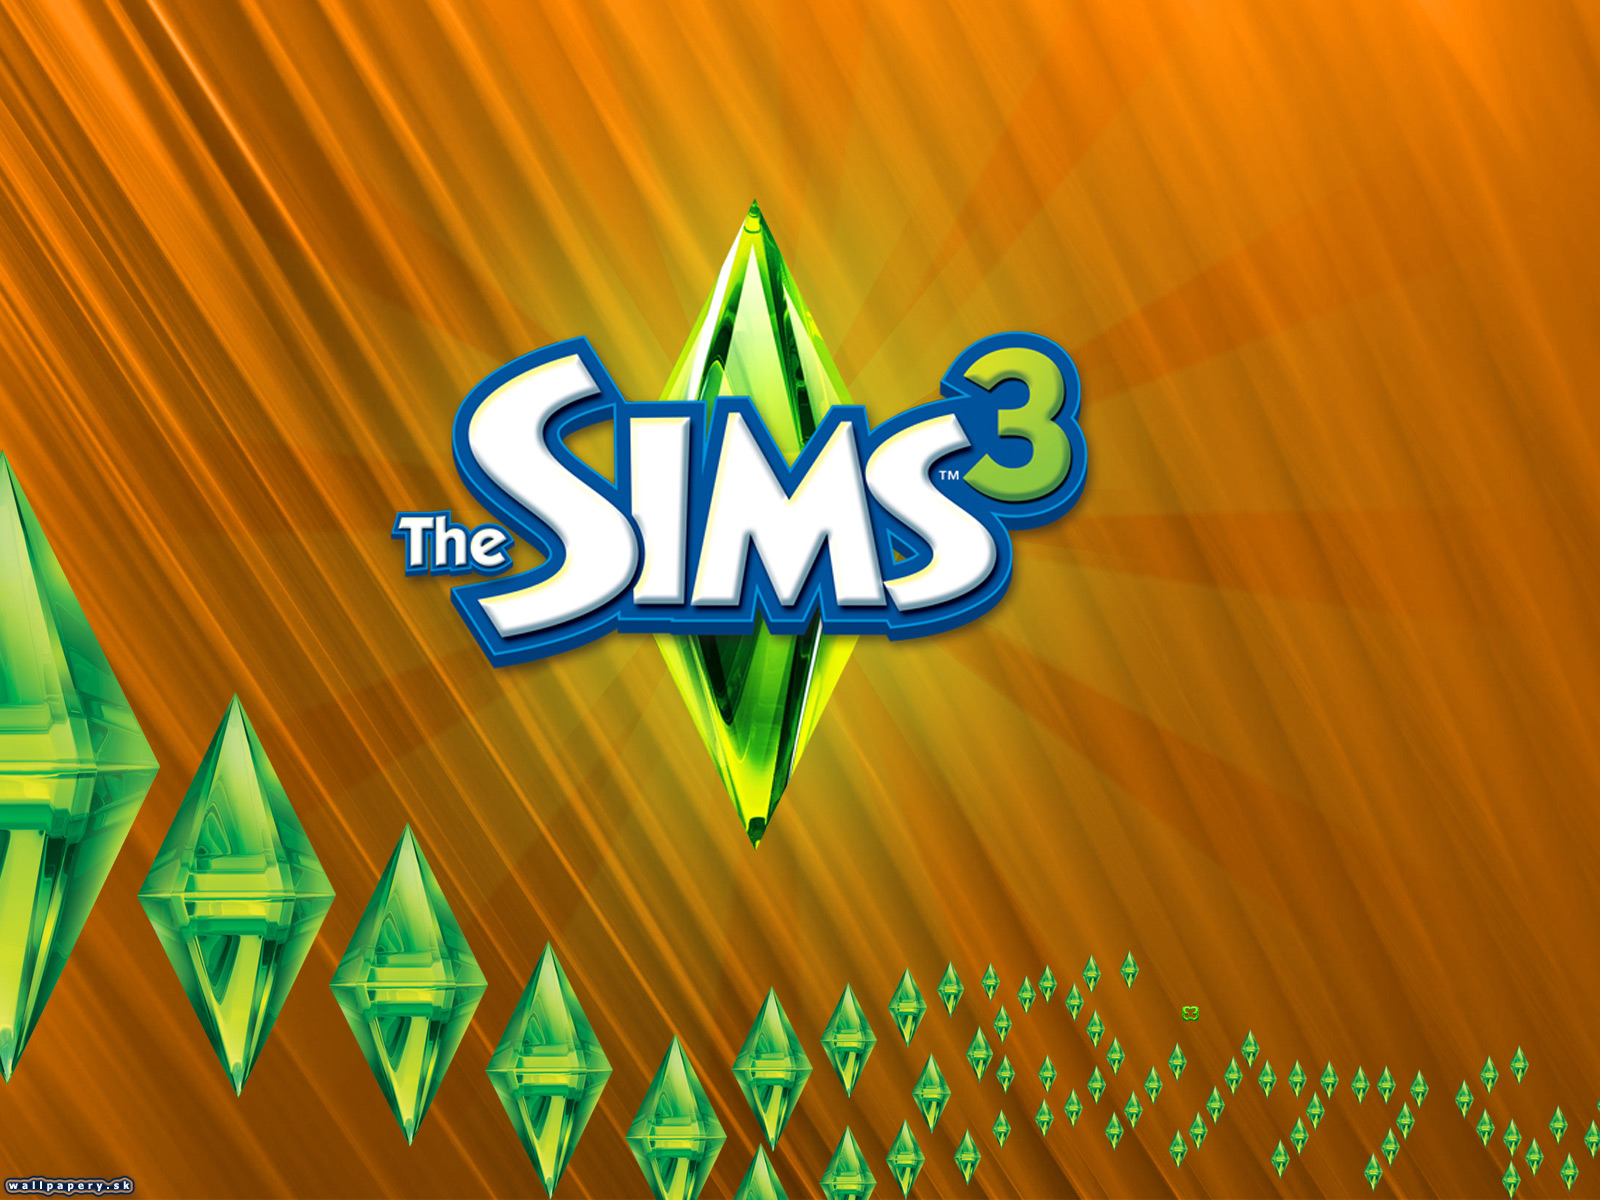 The Sims 3 - wallpaper 21